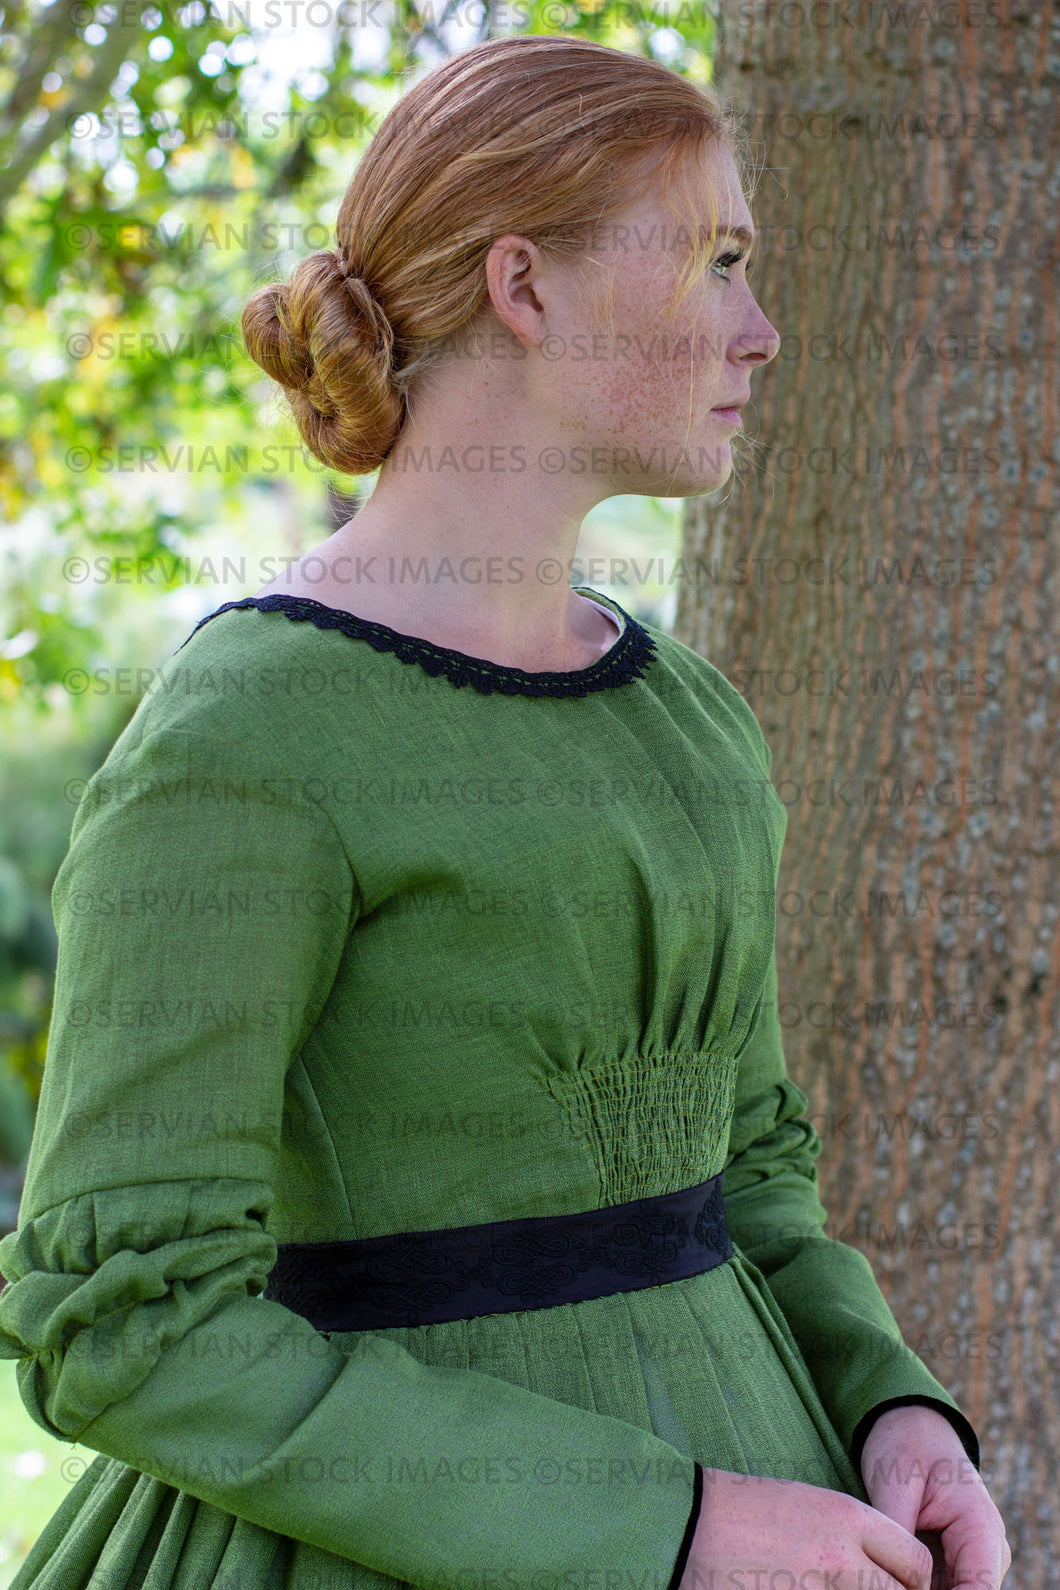 Victorian woman in a green gather front bodice and skirt  (Lauren 0102)